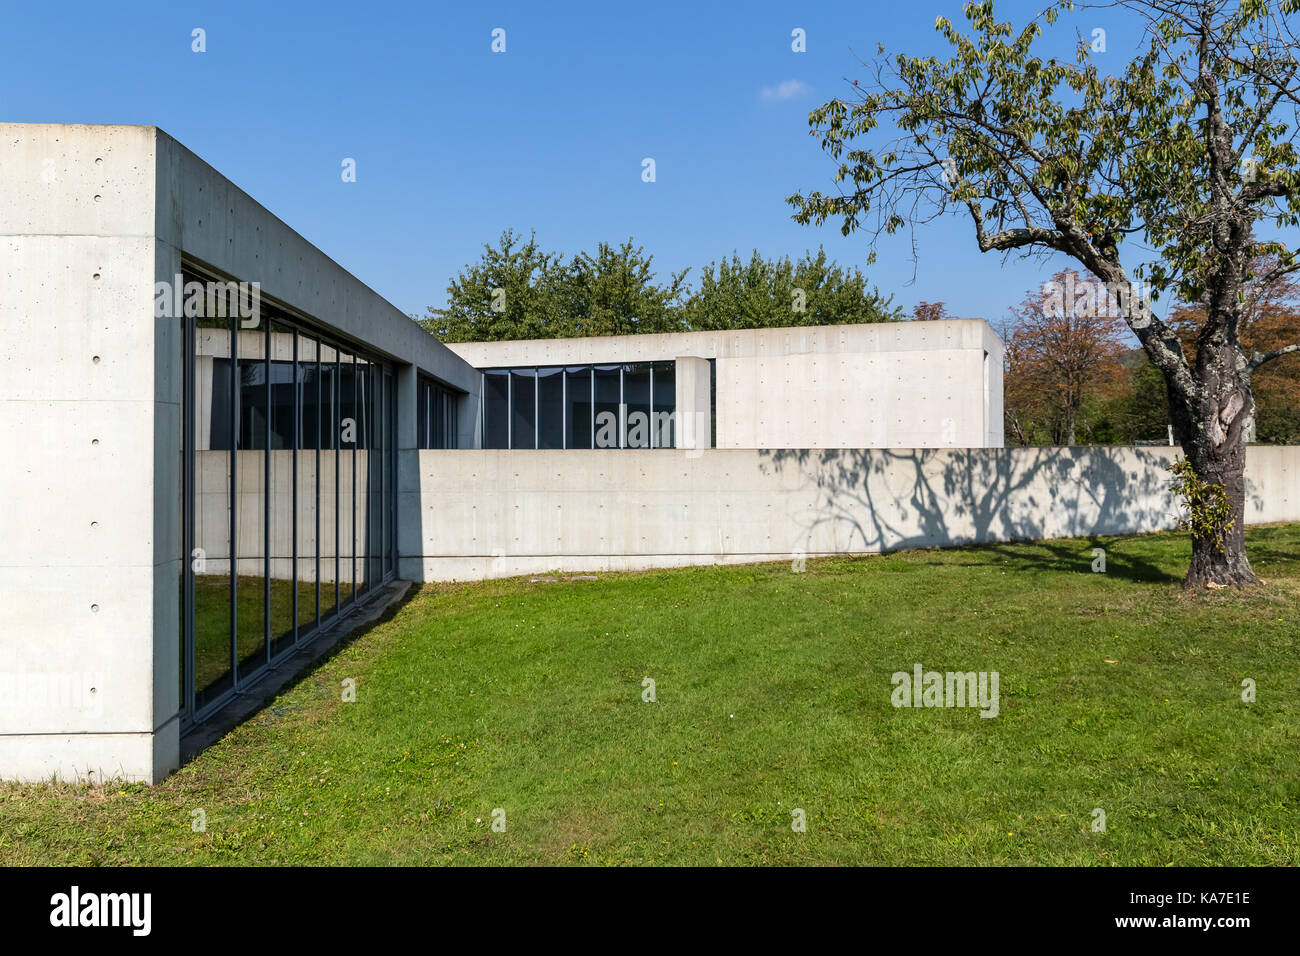 Conference Pavilion by Tadao Ando, Vitra Campus in Weil am Rhein, Germany  Stock Photo - Alamy